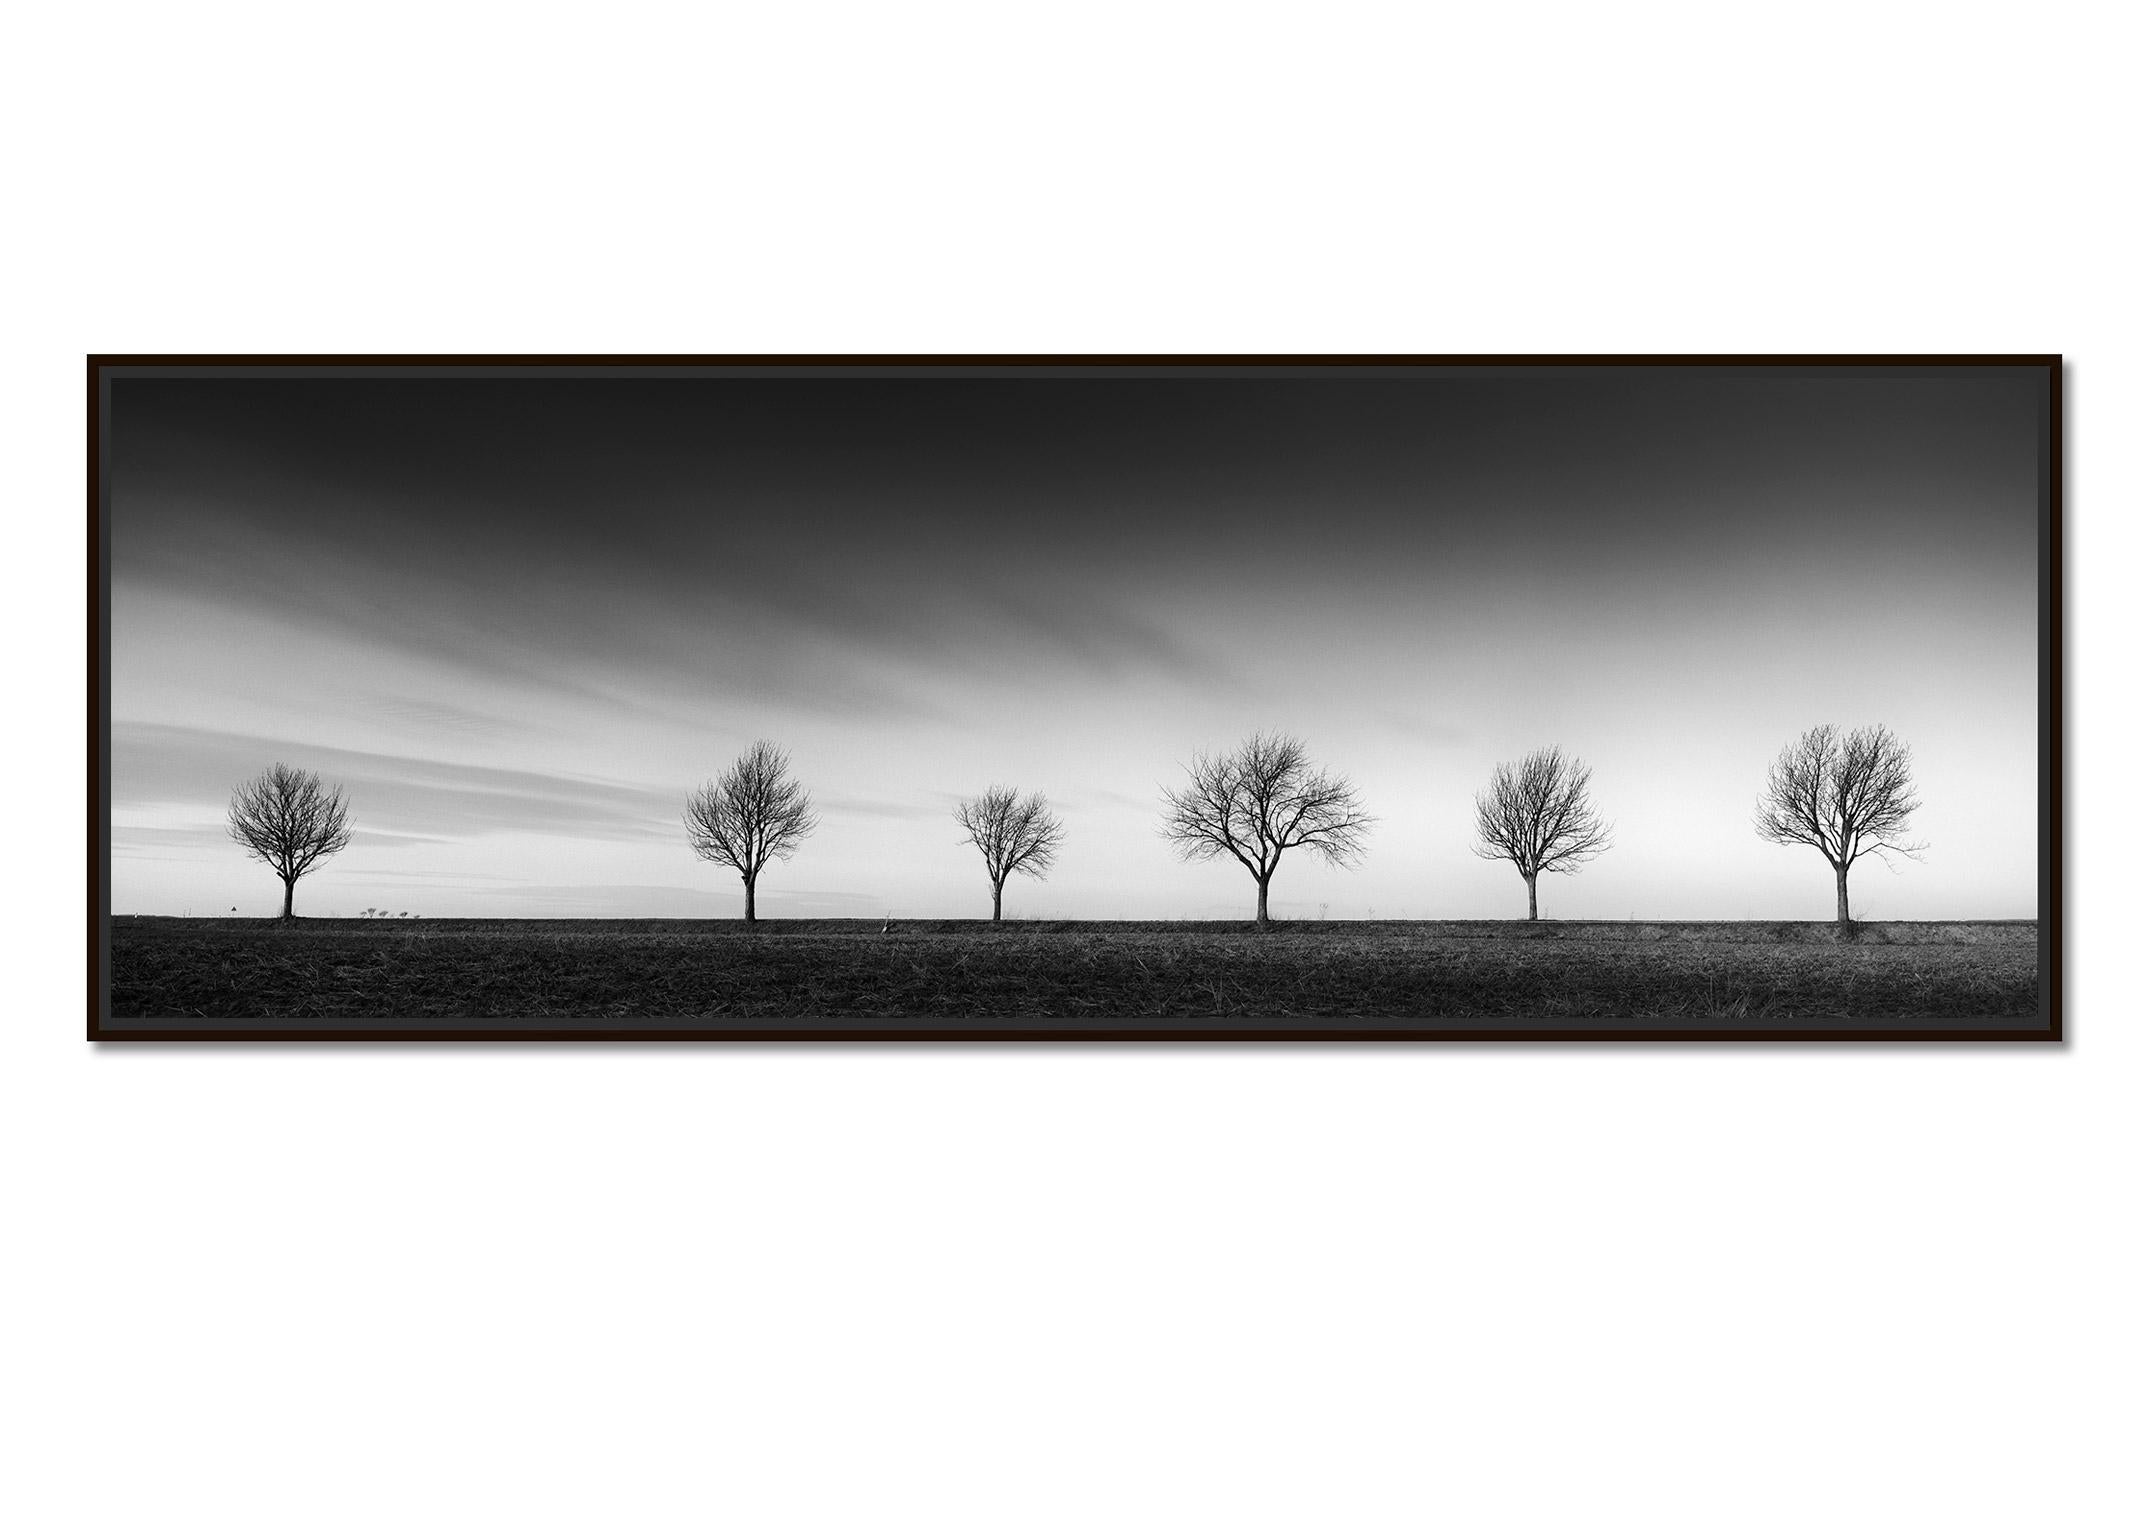 Row of six Cherry Trees, sunset, black and white panorama photography, landscape - Photograph by Gerald Berghammer